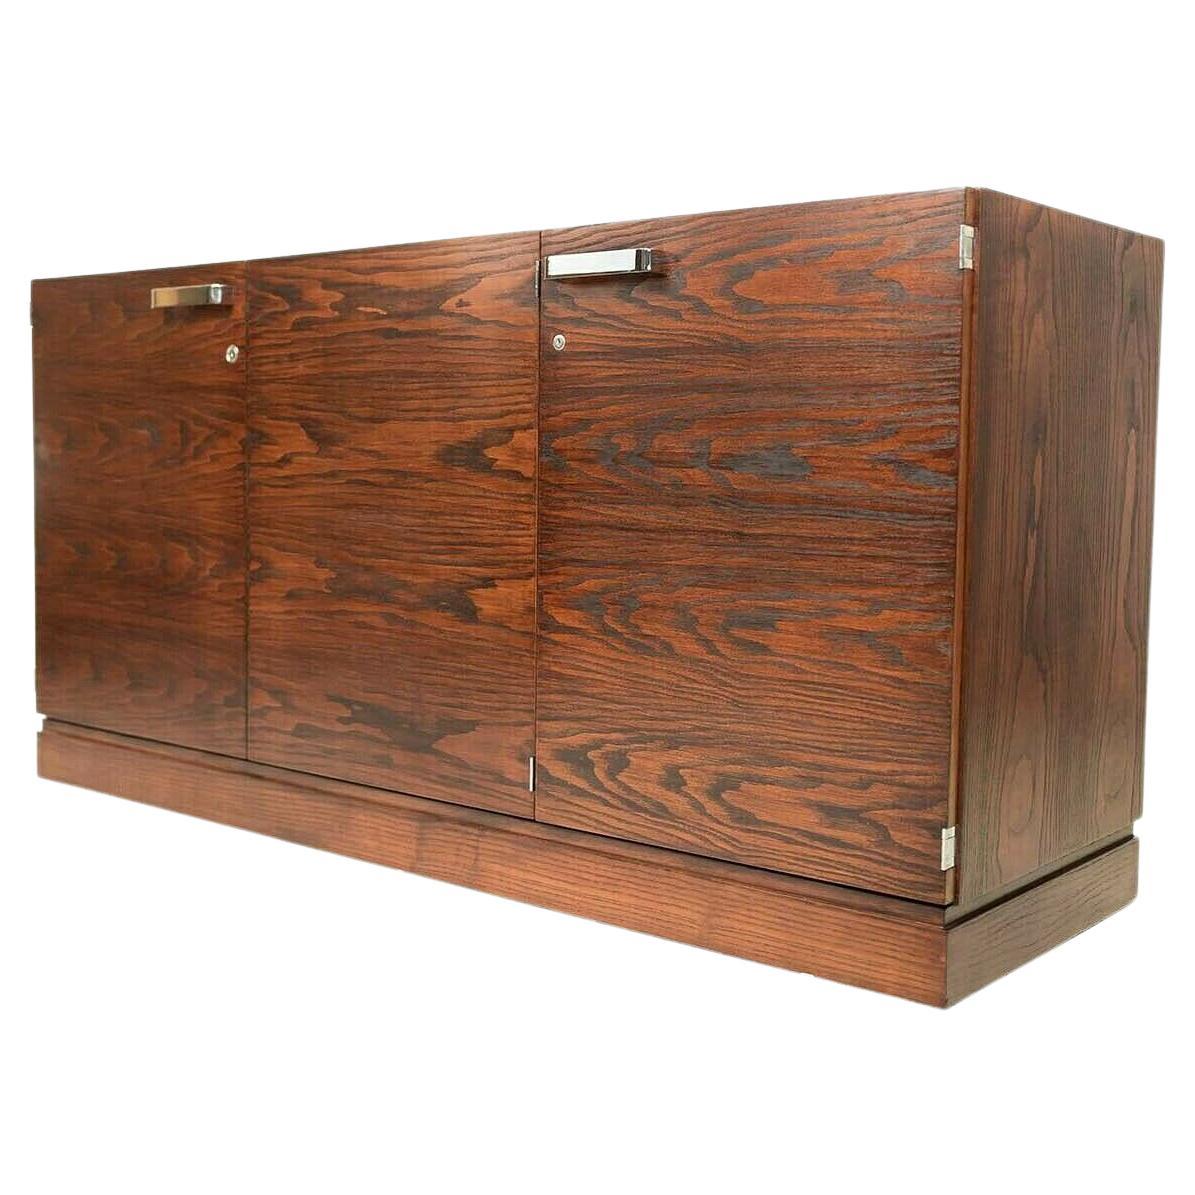 Gordon Russell office cabinet

A Ray Leigh for Gordon Russell mid-century office cabinet, made in England. 

This beautifully crafted rosewood cabinet is fitted with double doors plus a single door to the cupboard finished with chrome handles.